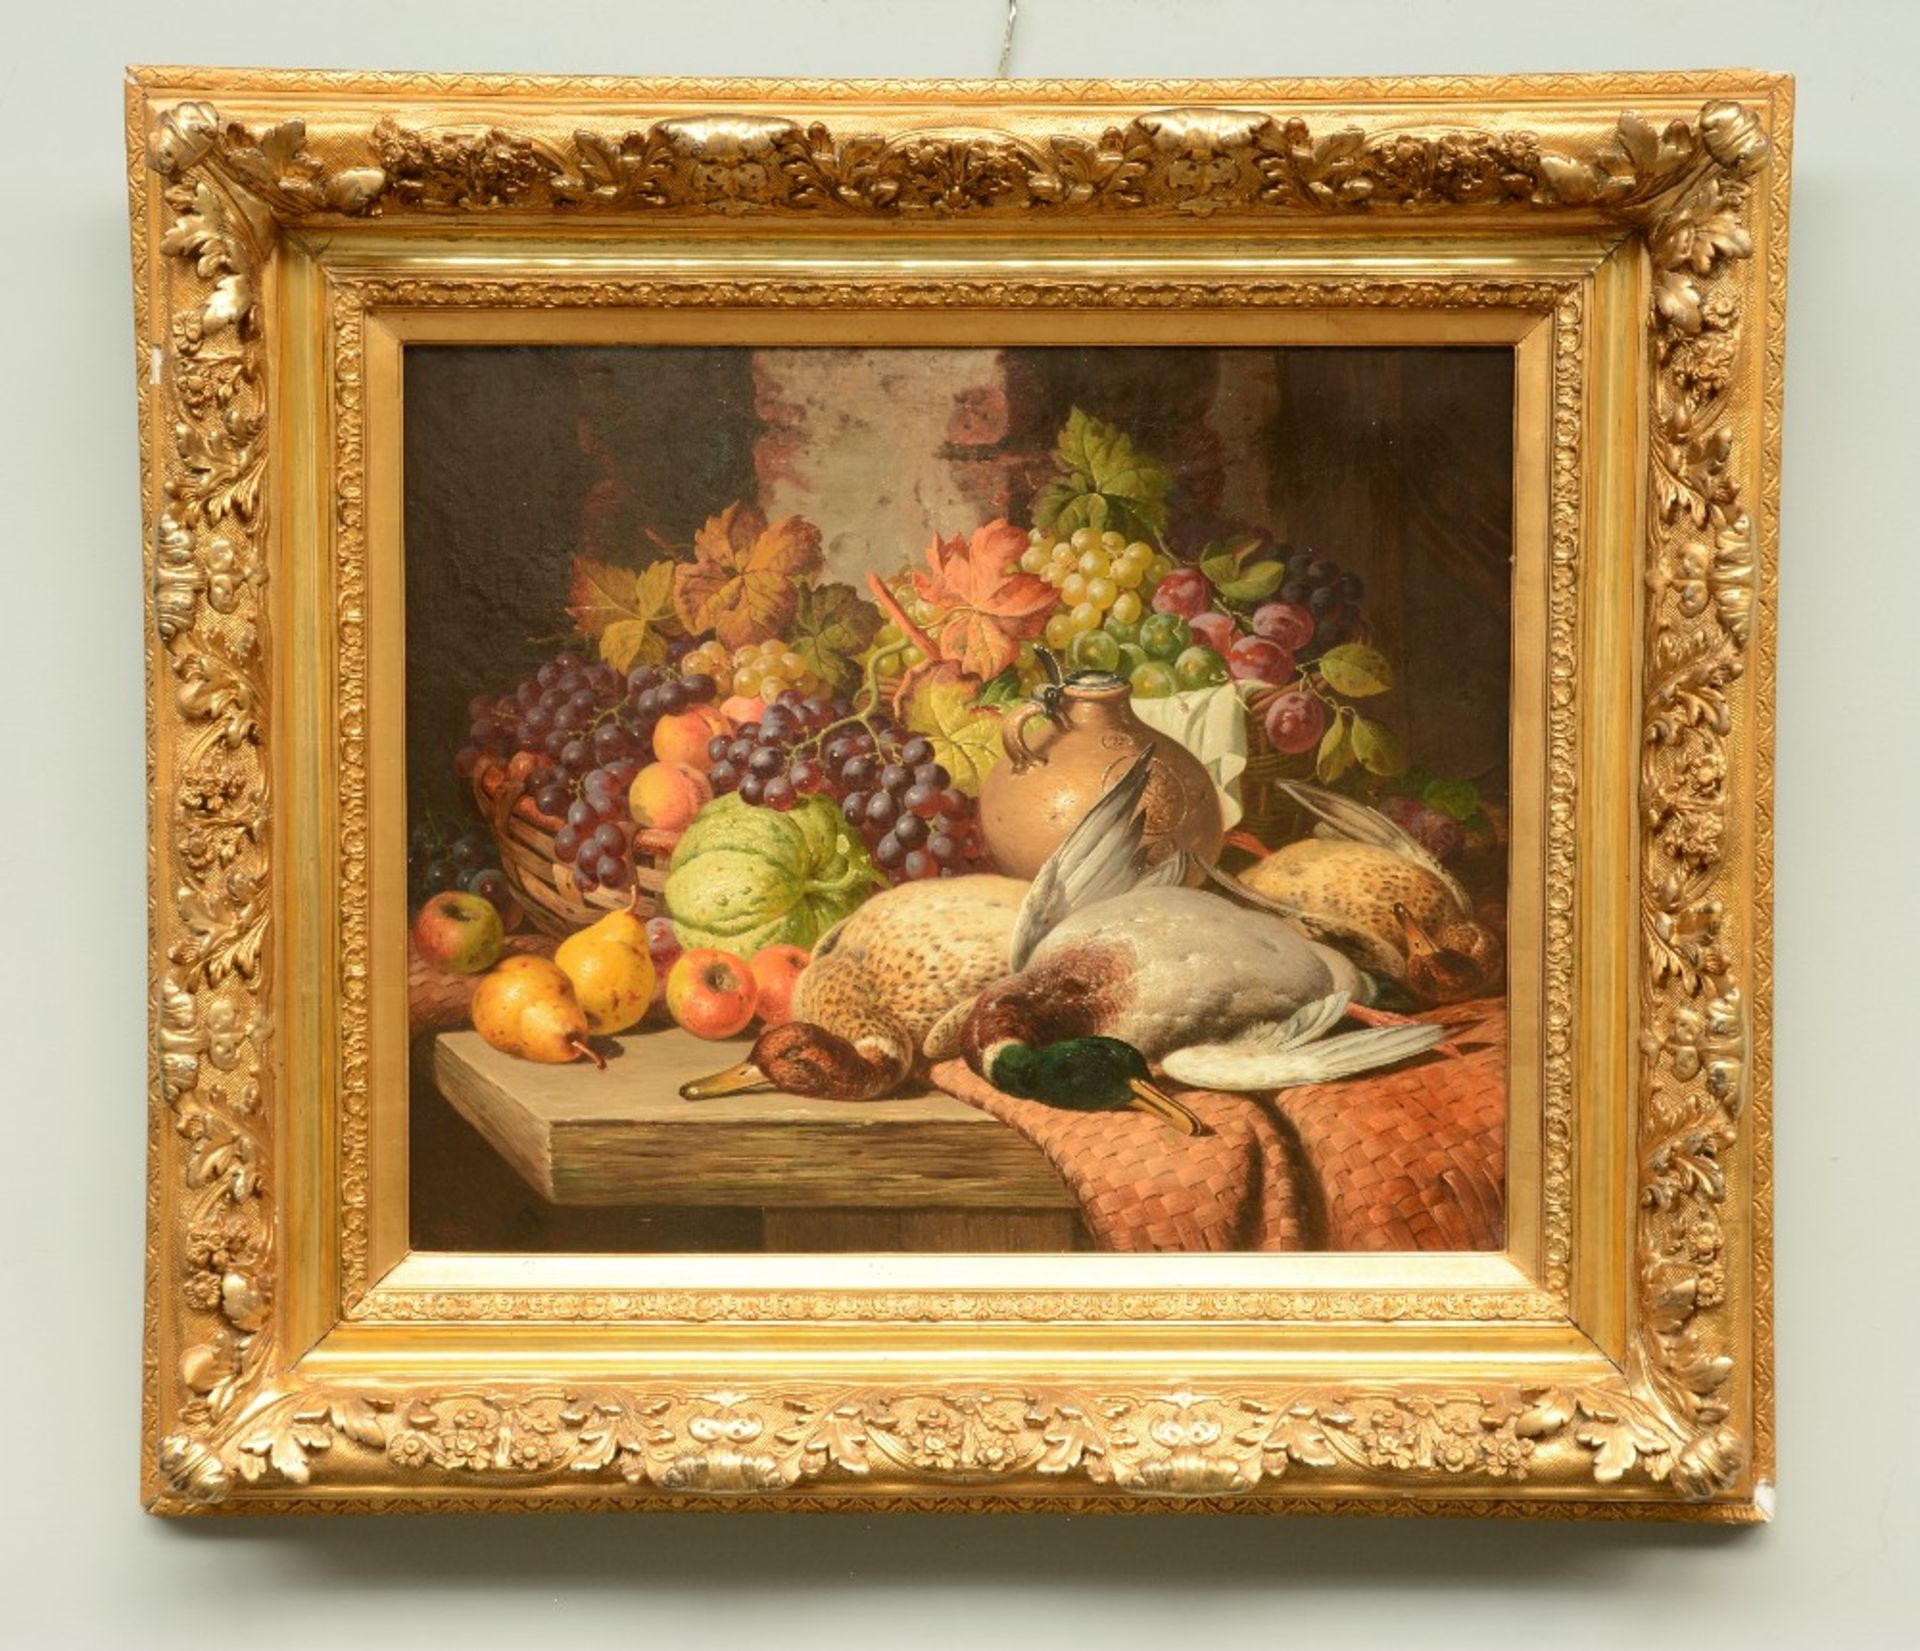 Bale Th., a still life with fruits and birds, oil on canvas, dated 1887, 71 x 92 cm - Image 2 of 6